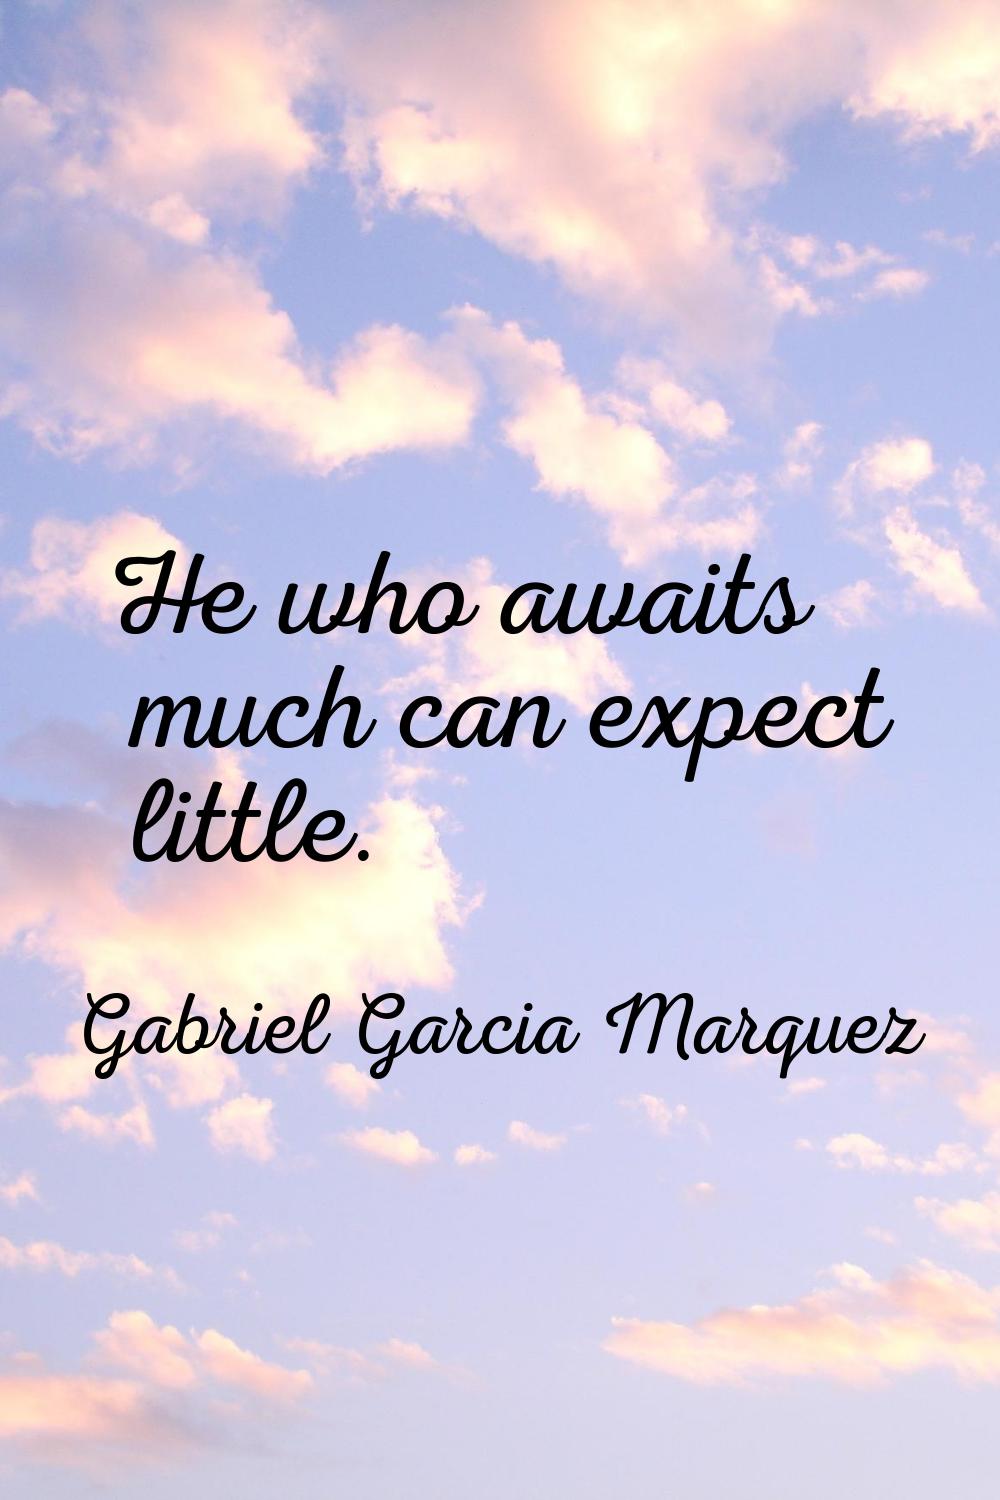 He who awaits much can expect little.